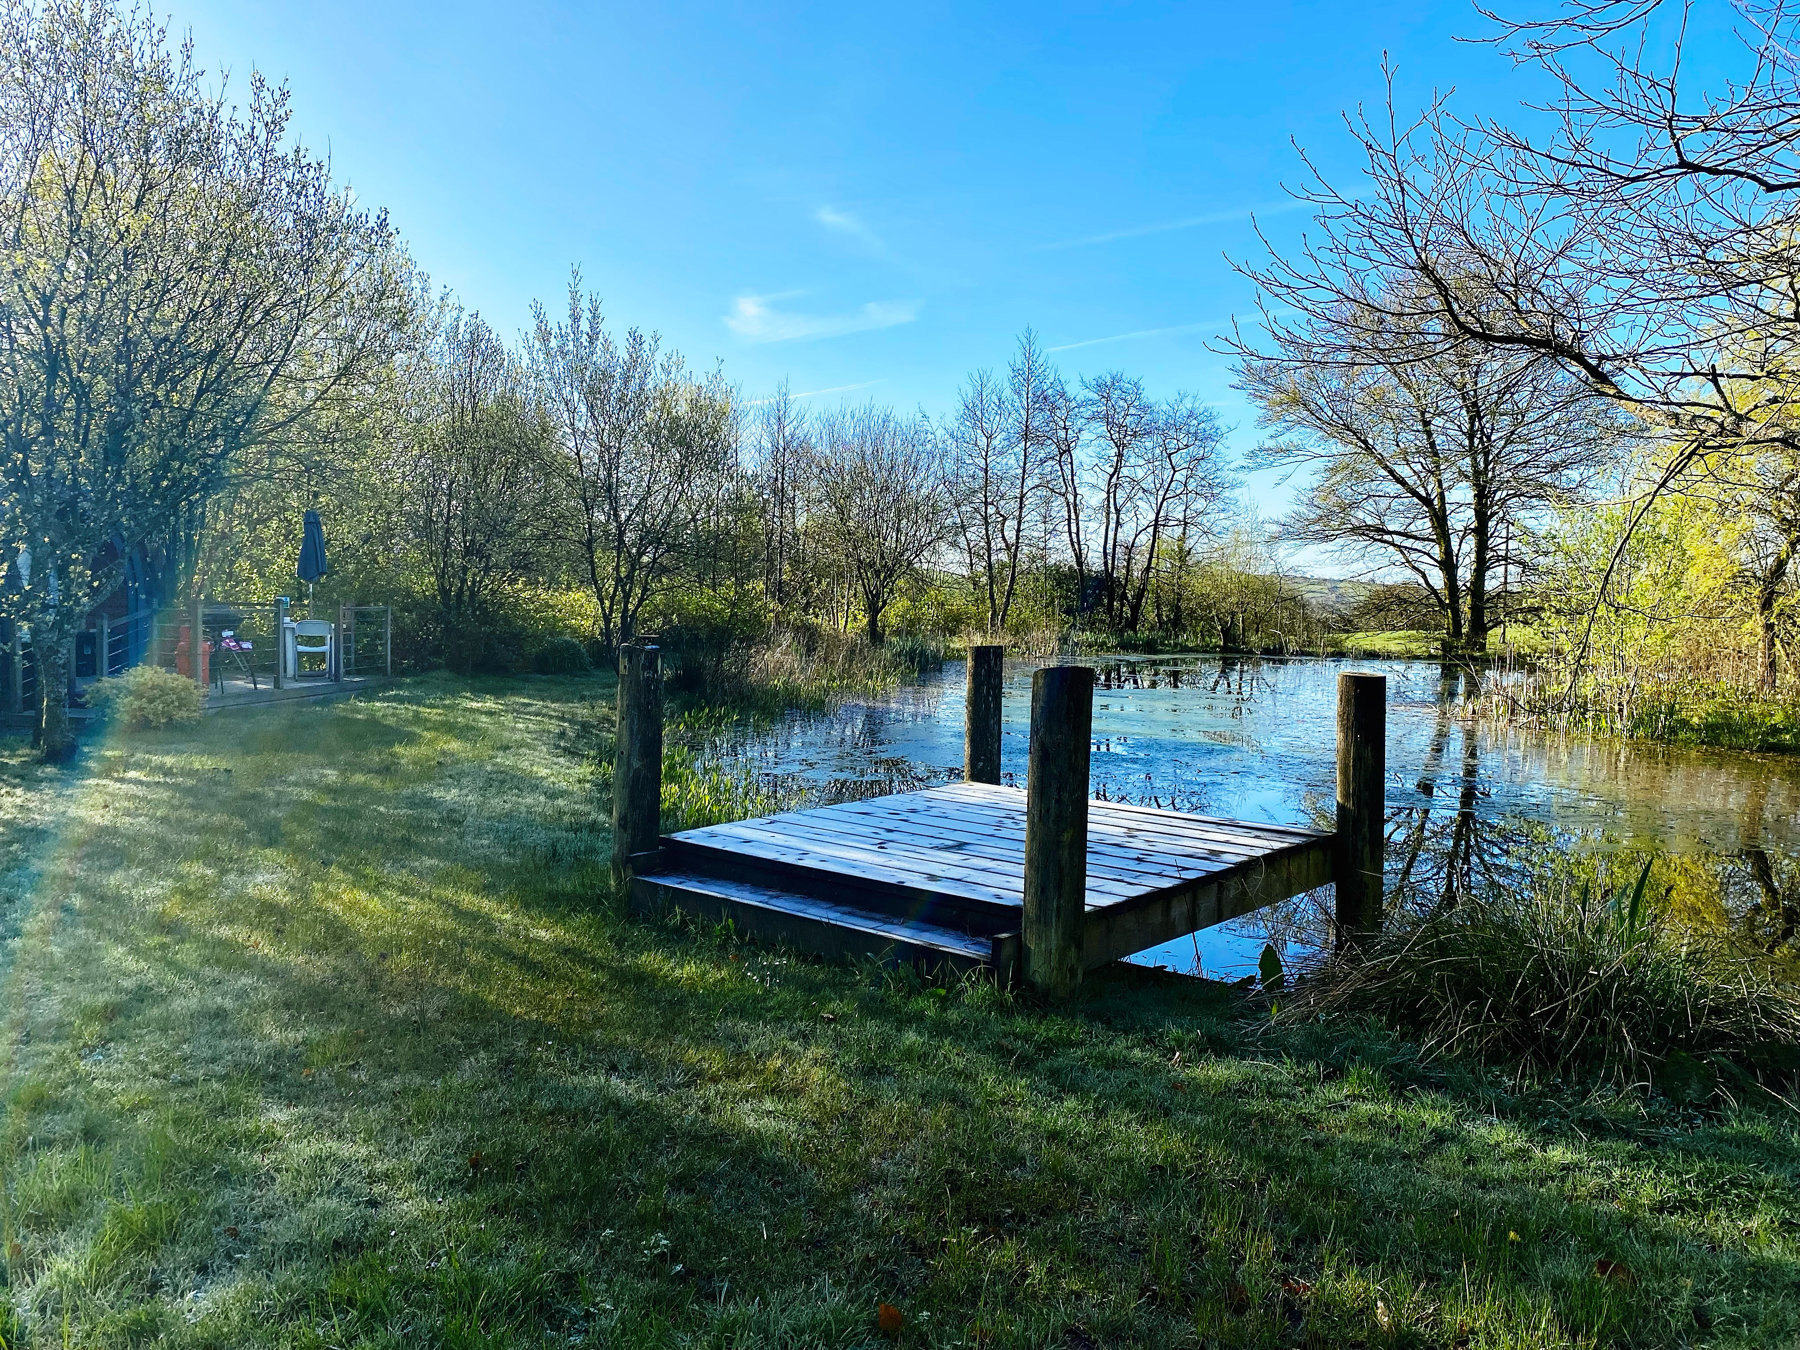 A serene pond surrounded by budding trees with a small wooden dock in the foreground and clear blue skies above.